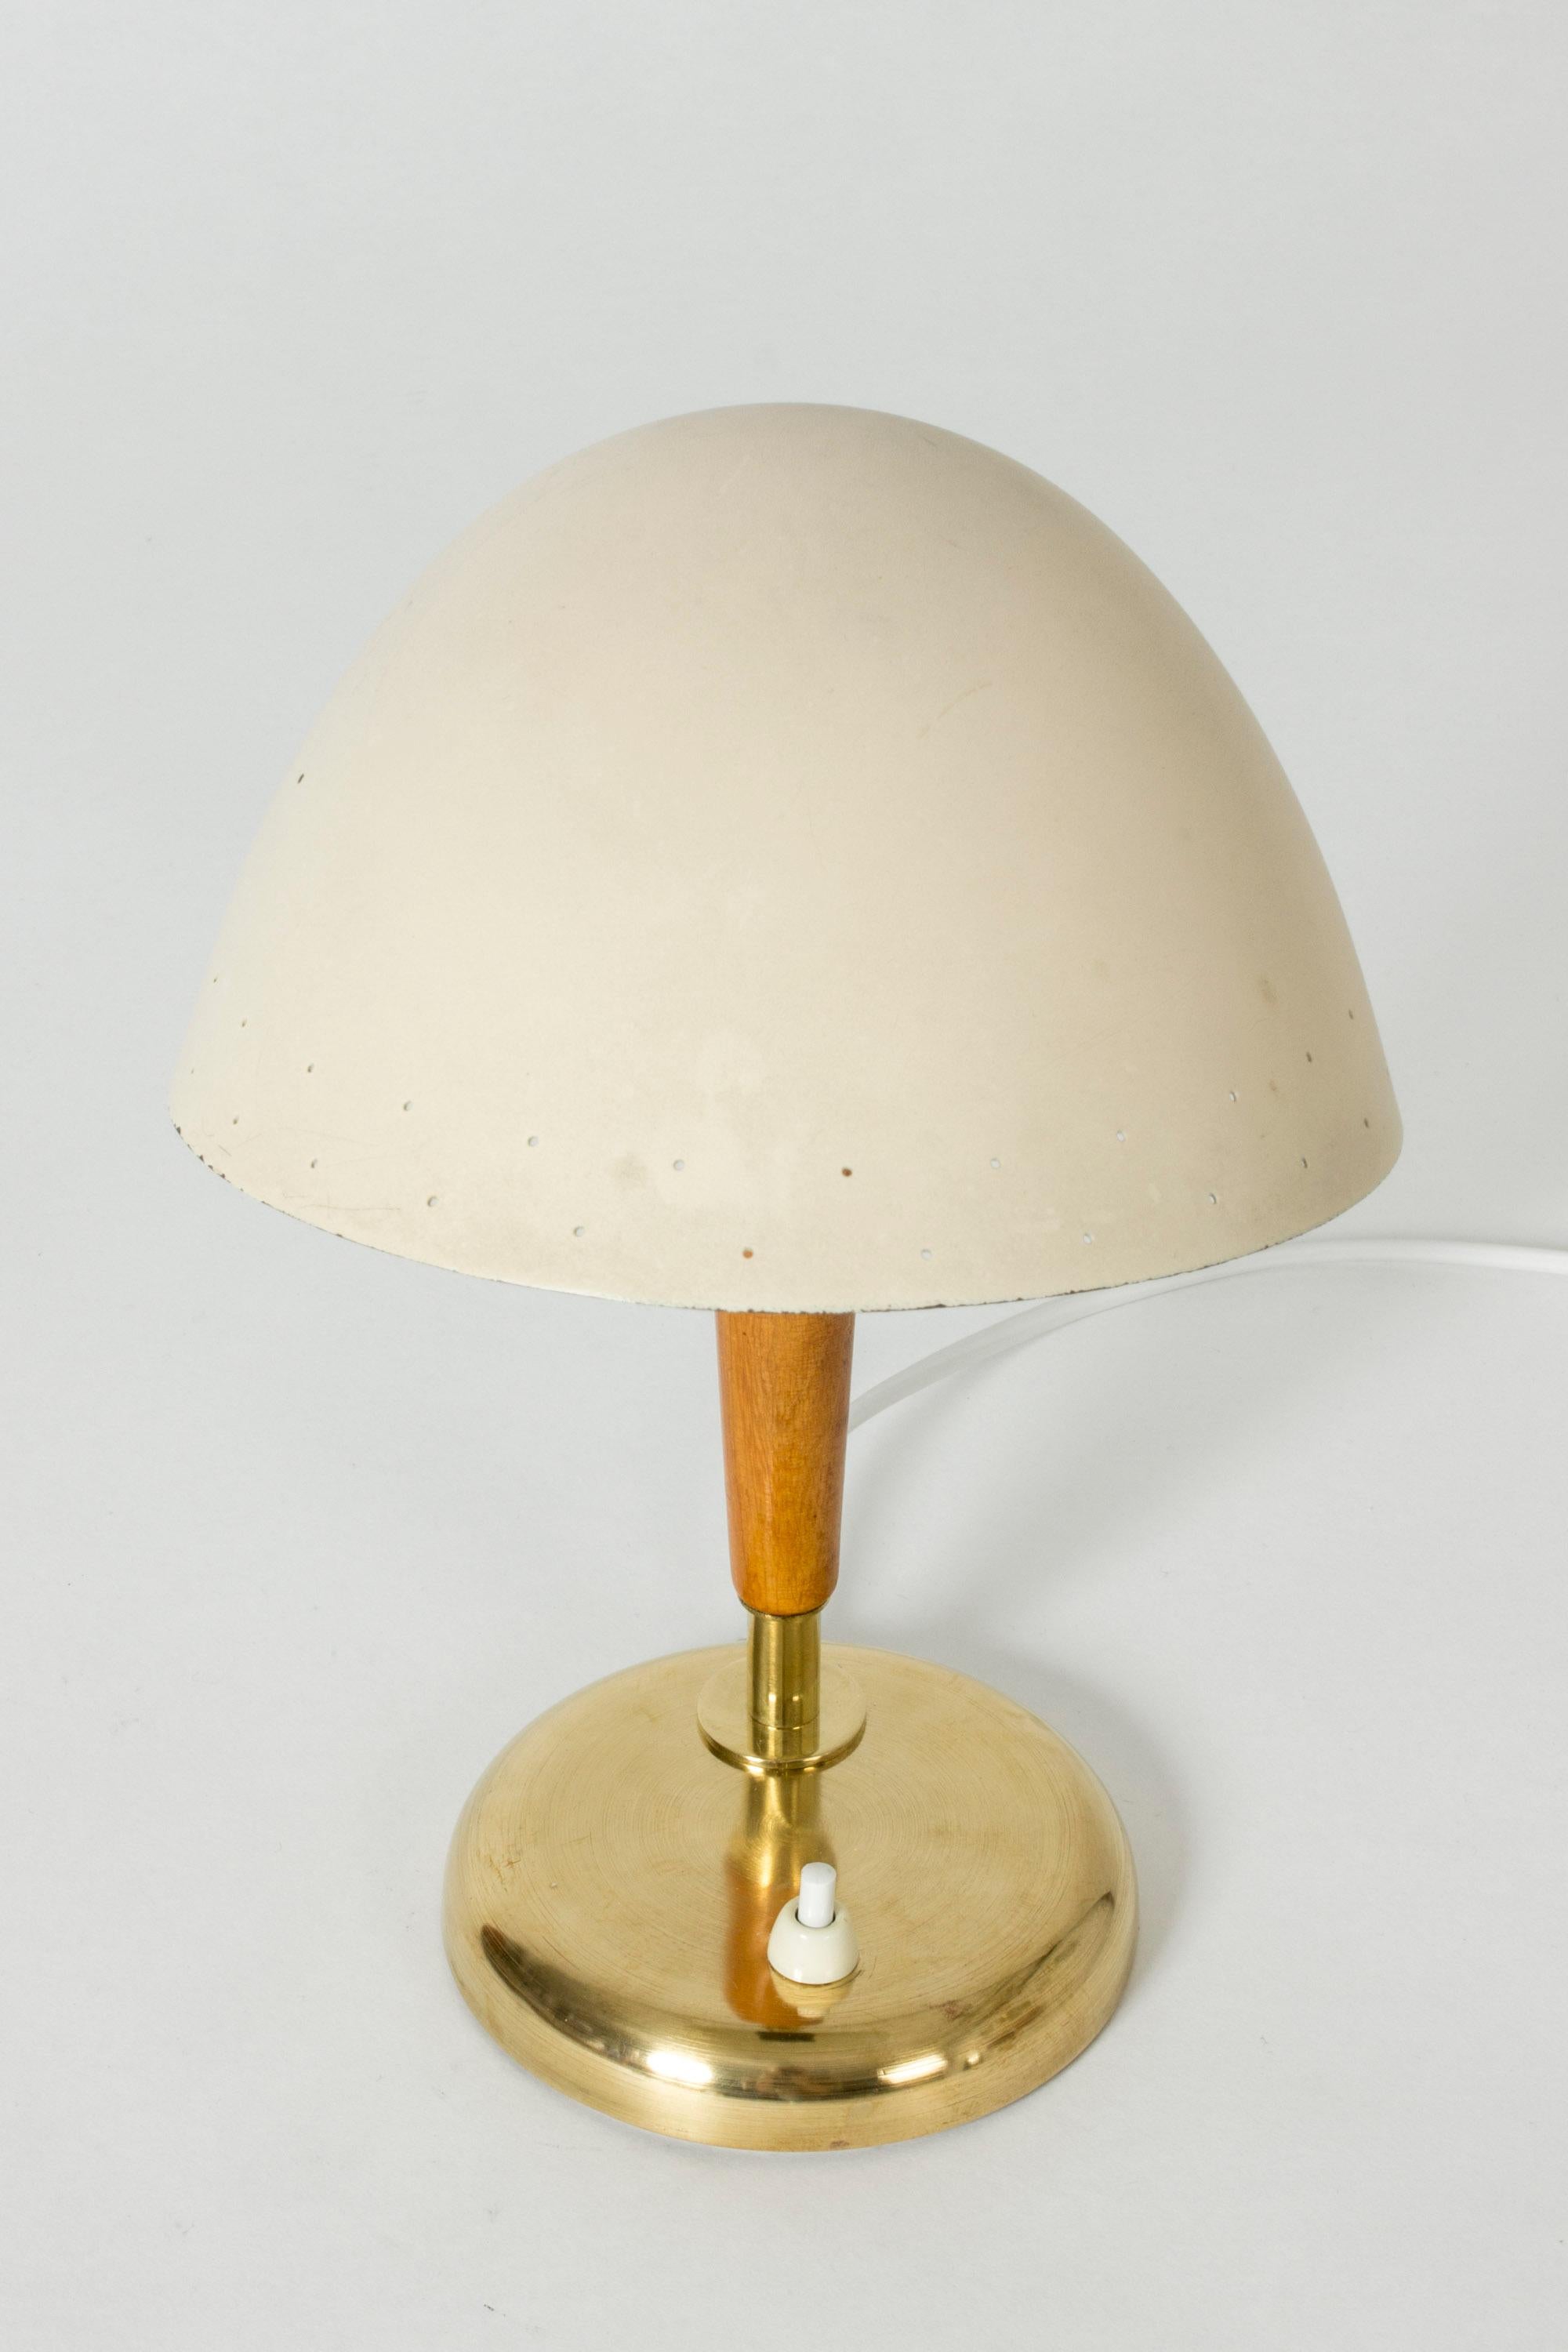 Mid-20th Century Swedish Cream Colored Pierced Brass and Wood Table Lamp from Böhlmarks